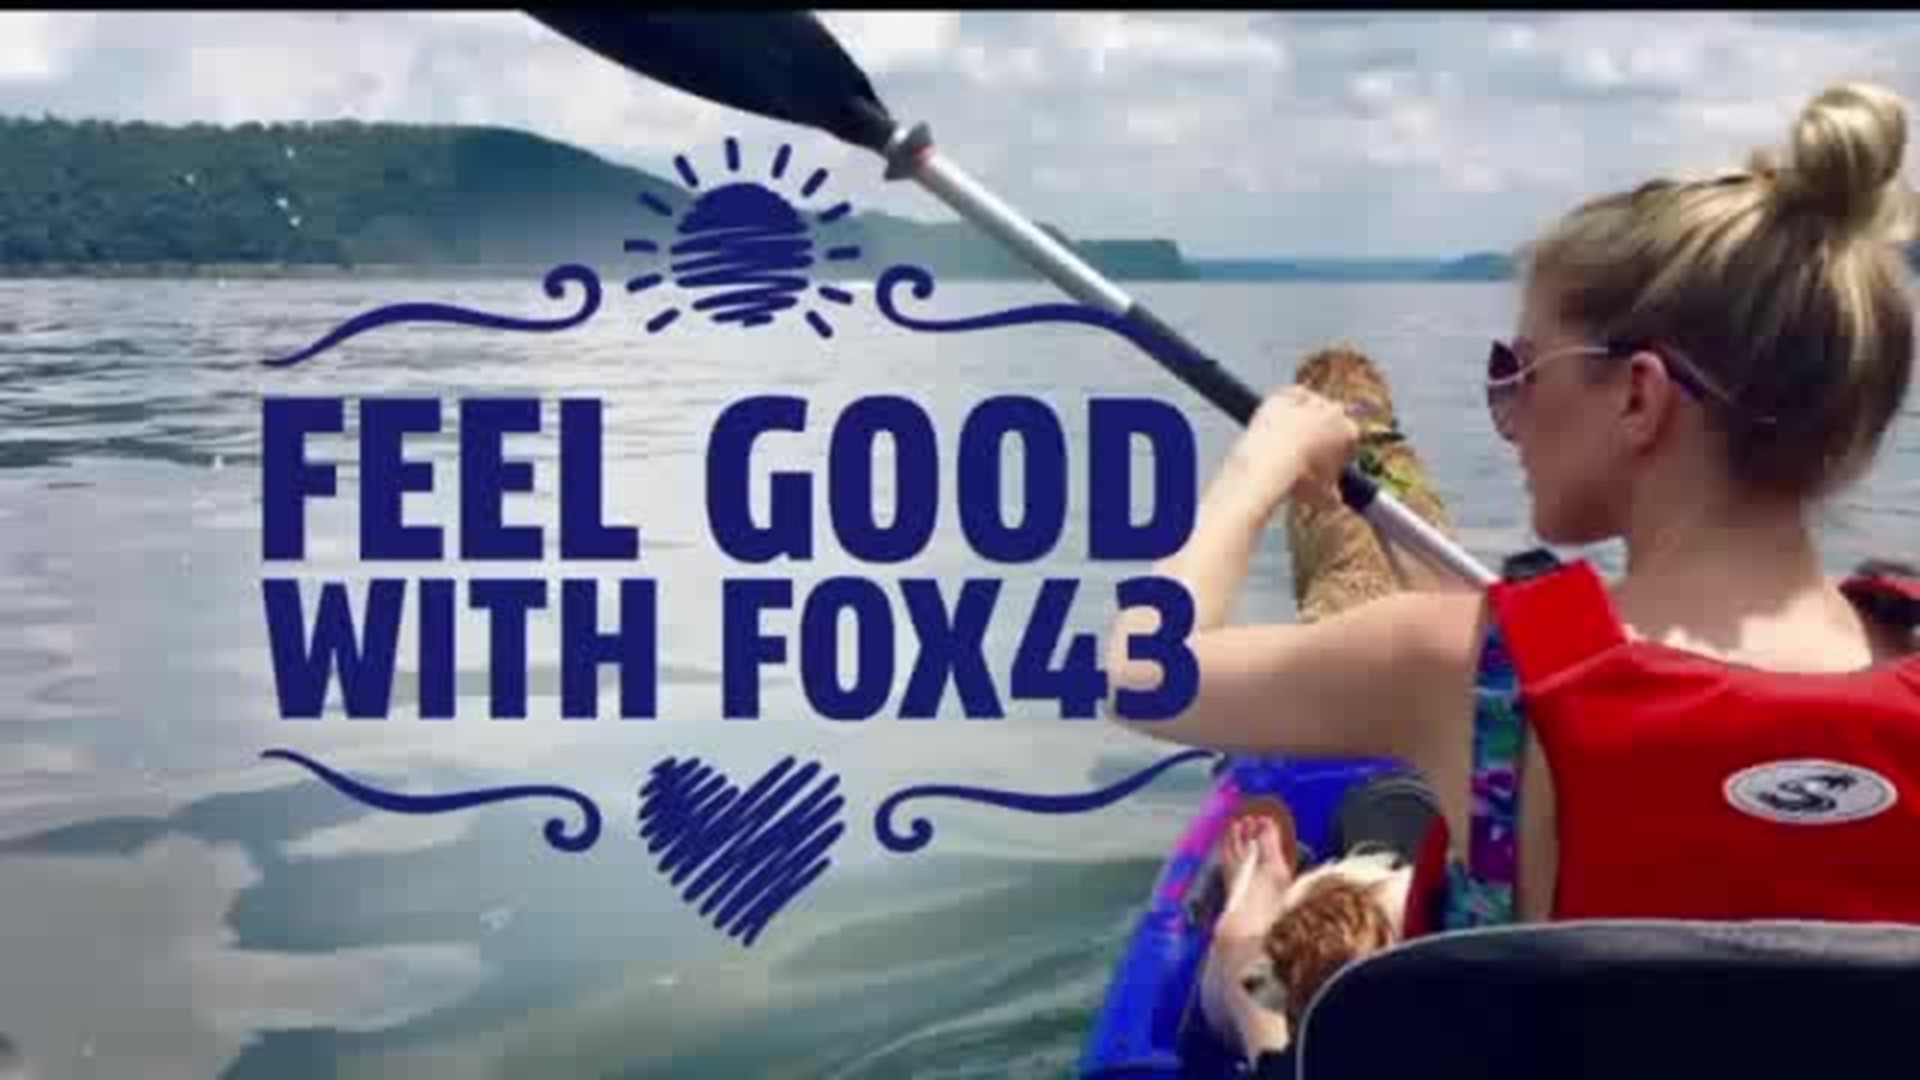 Feel Good with Fox 43 - Practical cardio workouts